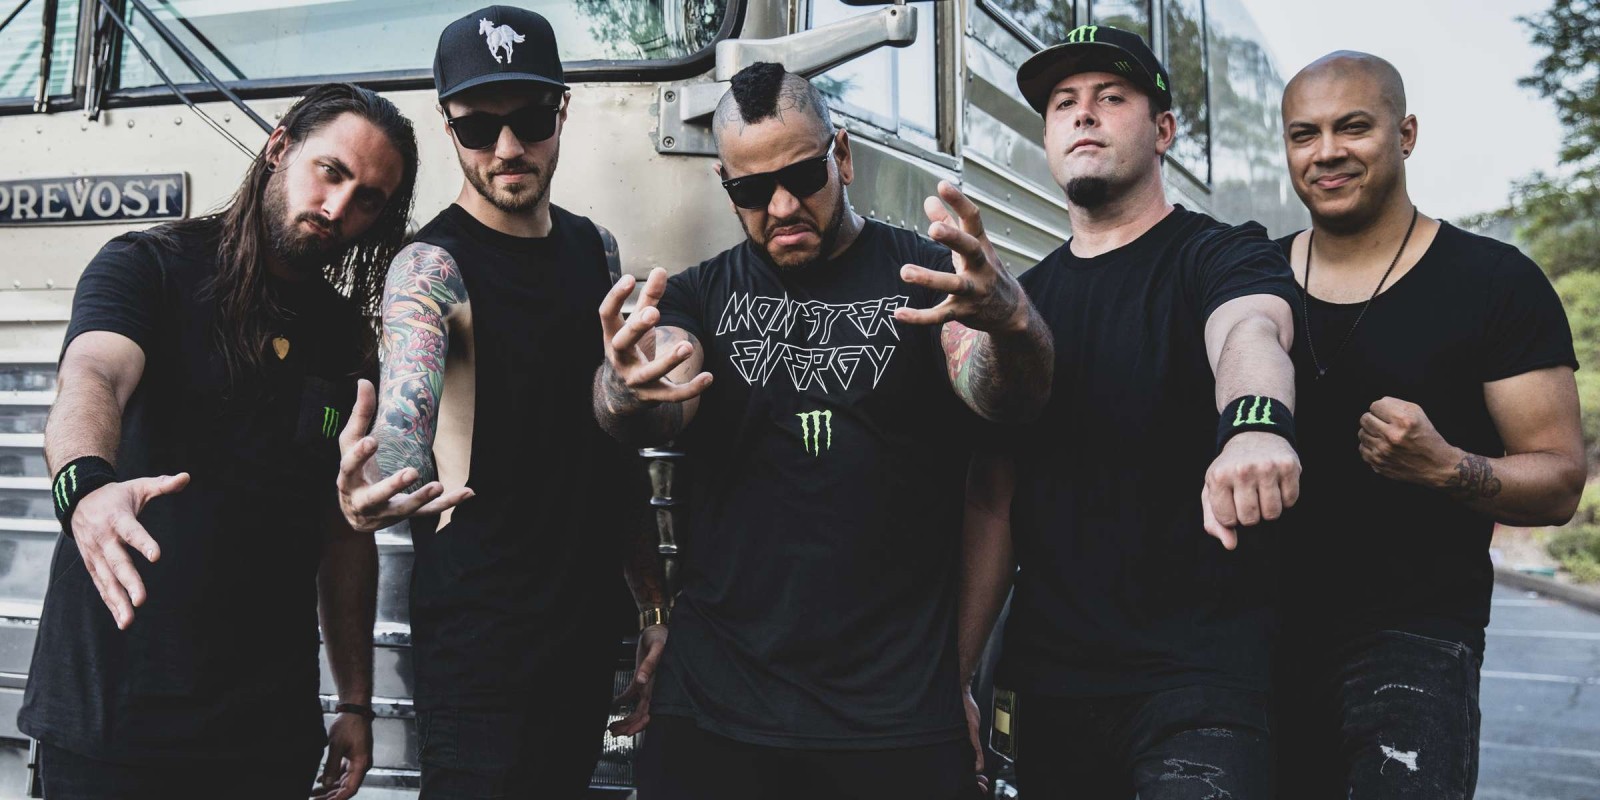 Tommy Vext (Ex-Bad Wolves) pide a sus fans que no atquen a Bad Wolves tras su marcha.